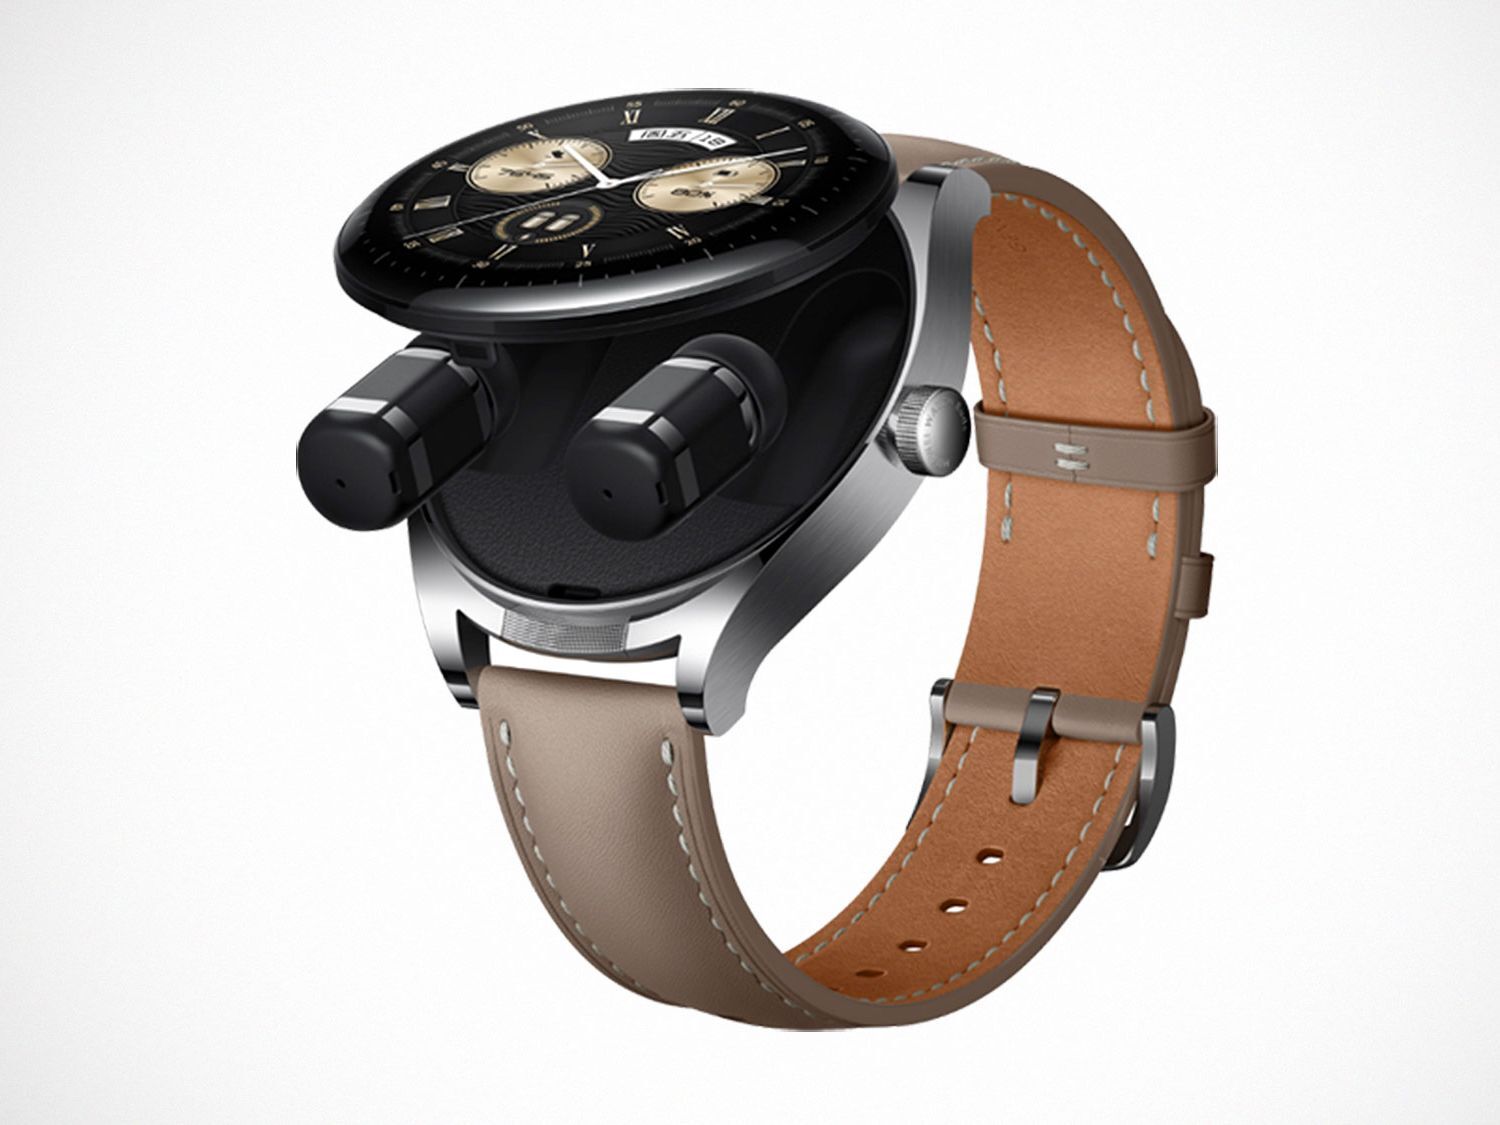 The design of the Huawei Watch Buds removes the need to carry a charging case around. - The Huawei Watch Buds is released and yes, there are buds inside the smartwatch